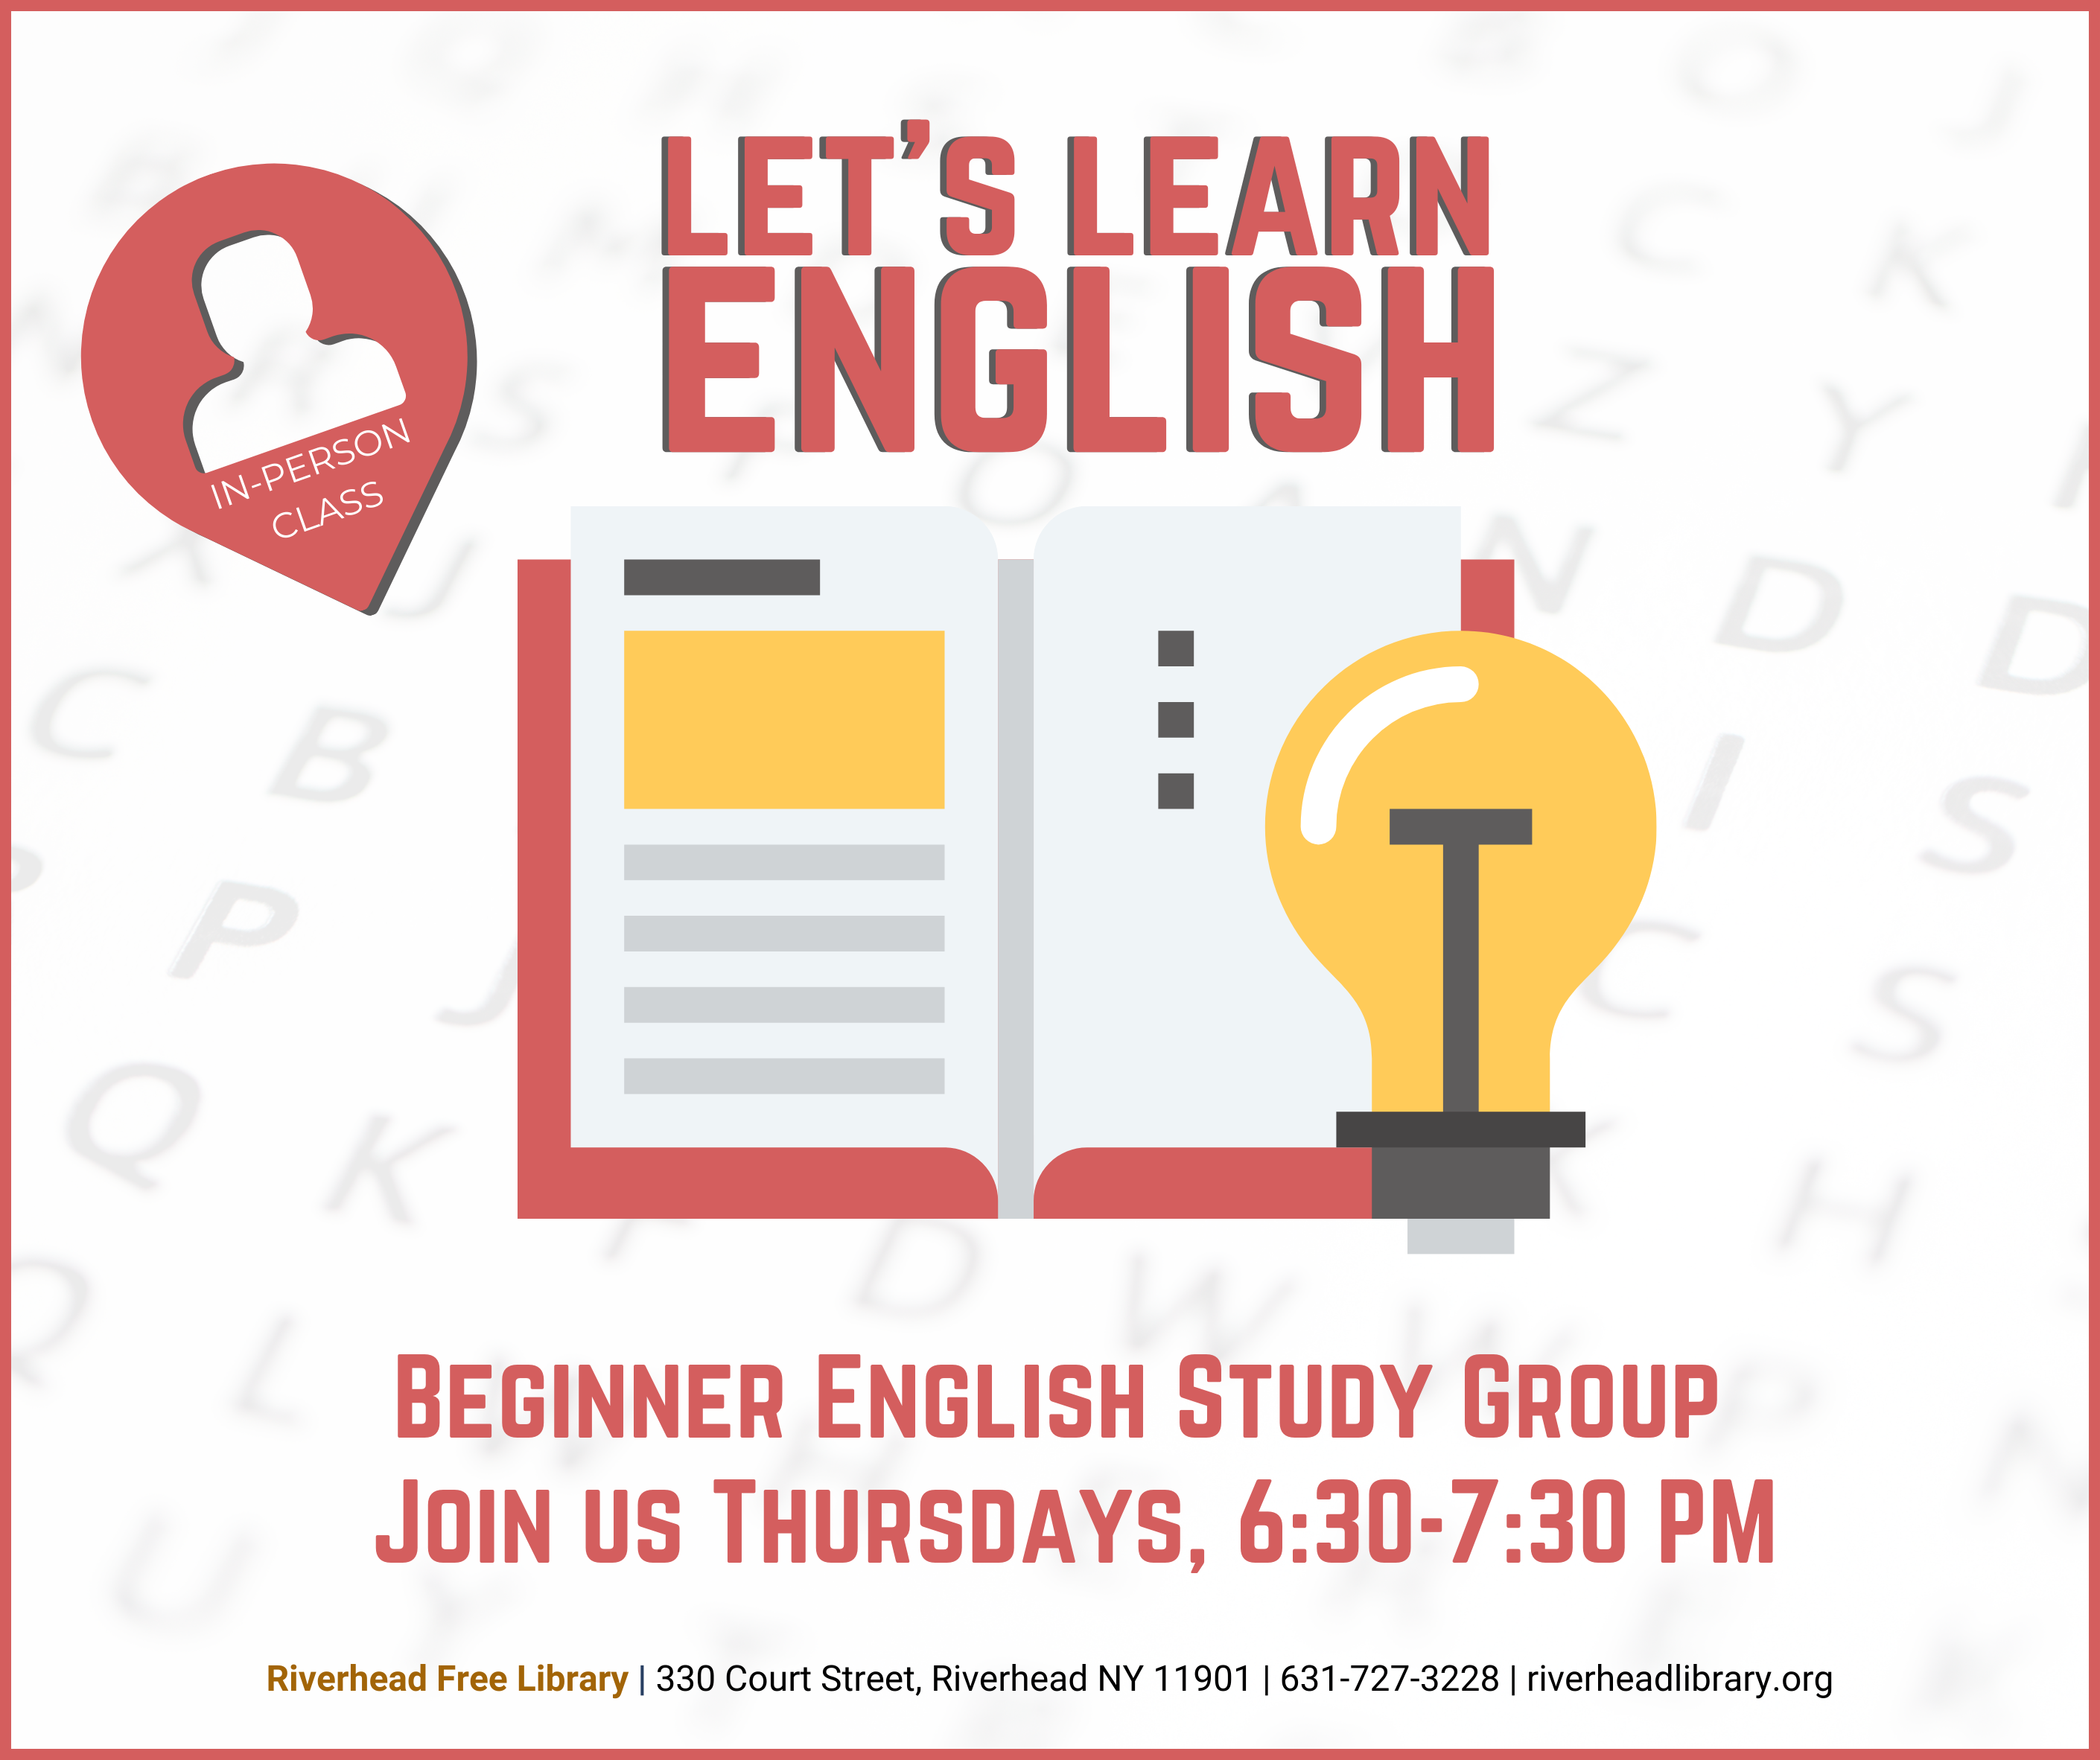 Let's Learn English [clip art of an open book and light bulb] In-person Class - Intermediate English Study Group Join Us Thursdays, 6:30-7:30PM